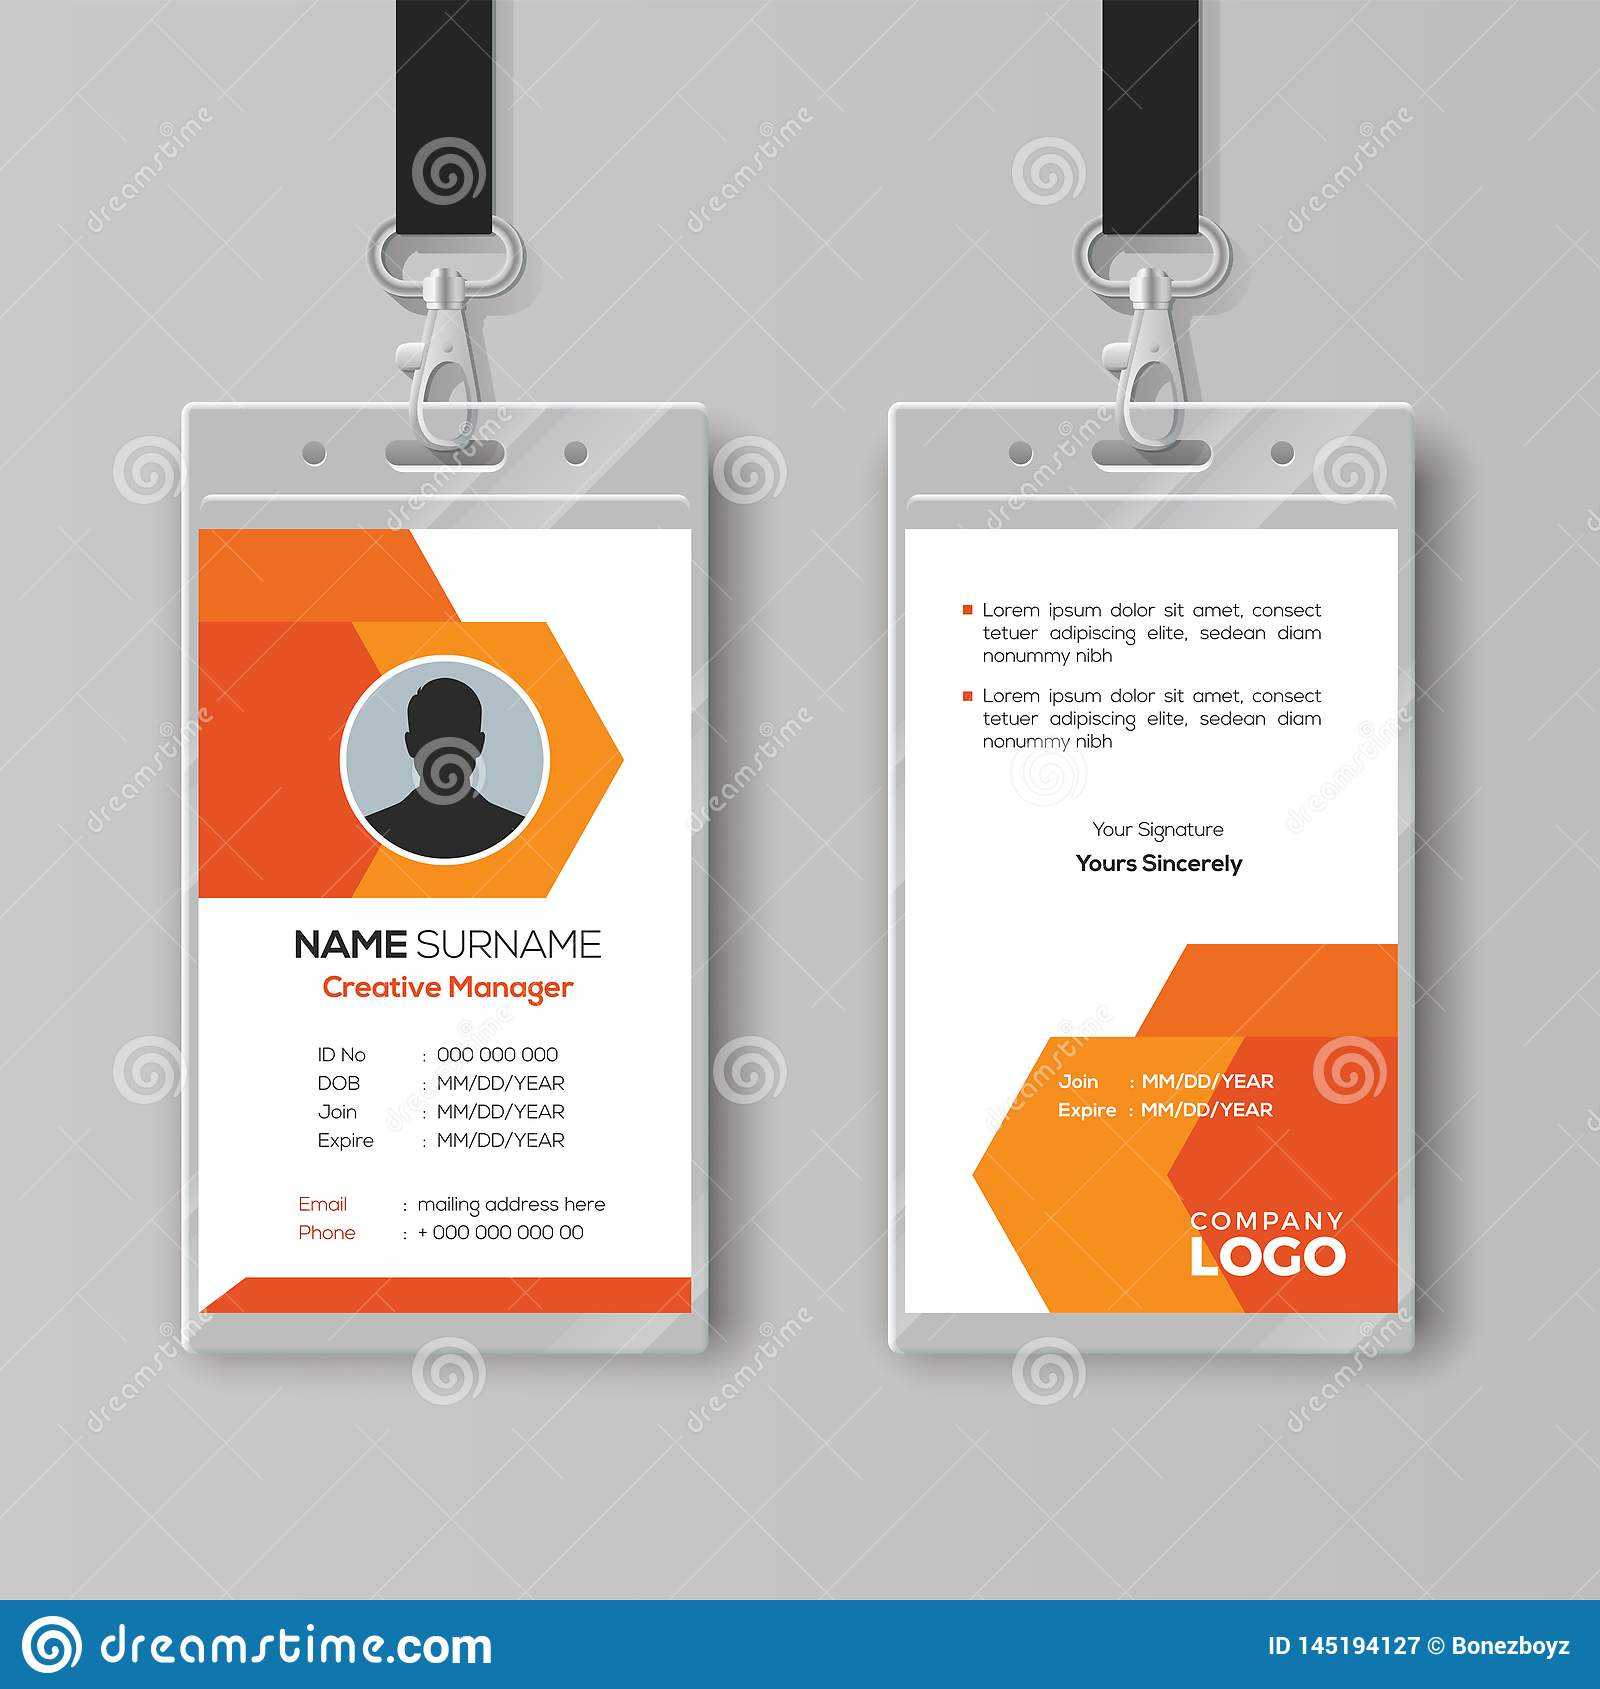 Abstract Orange Id Card Design Template Stock Vector In Company Id Card Design Template